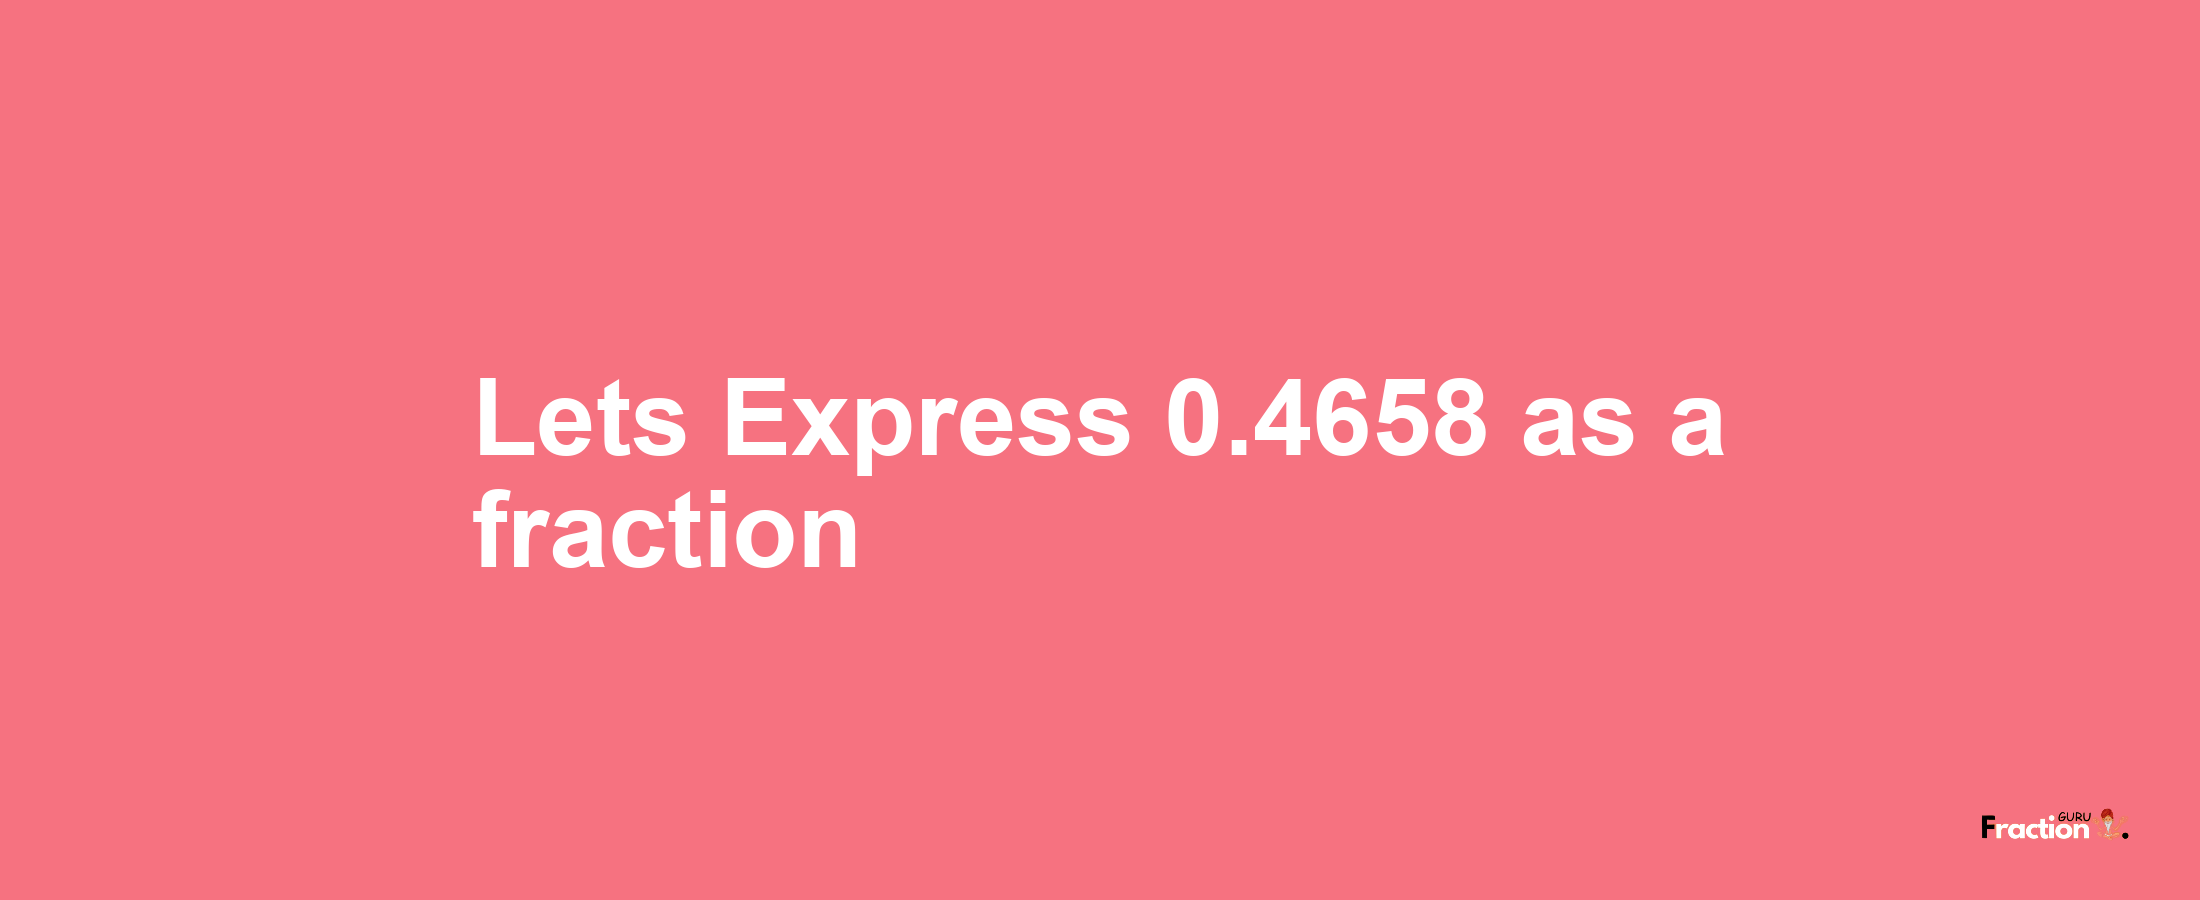 Lets Express 0.4658 as afraction